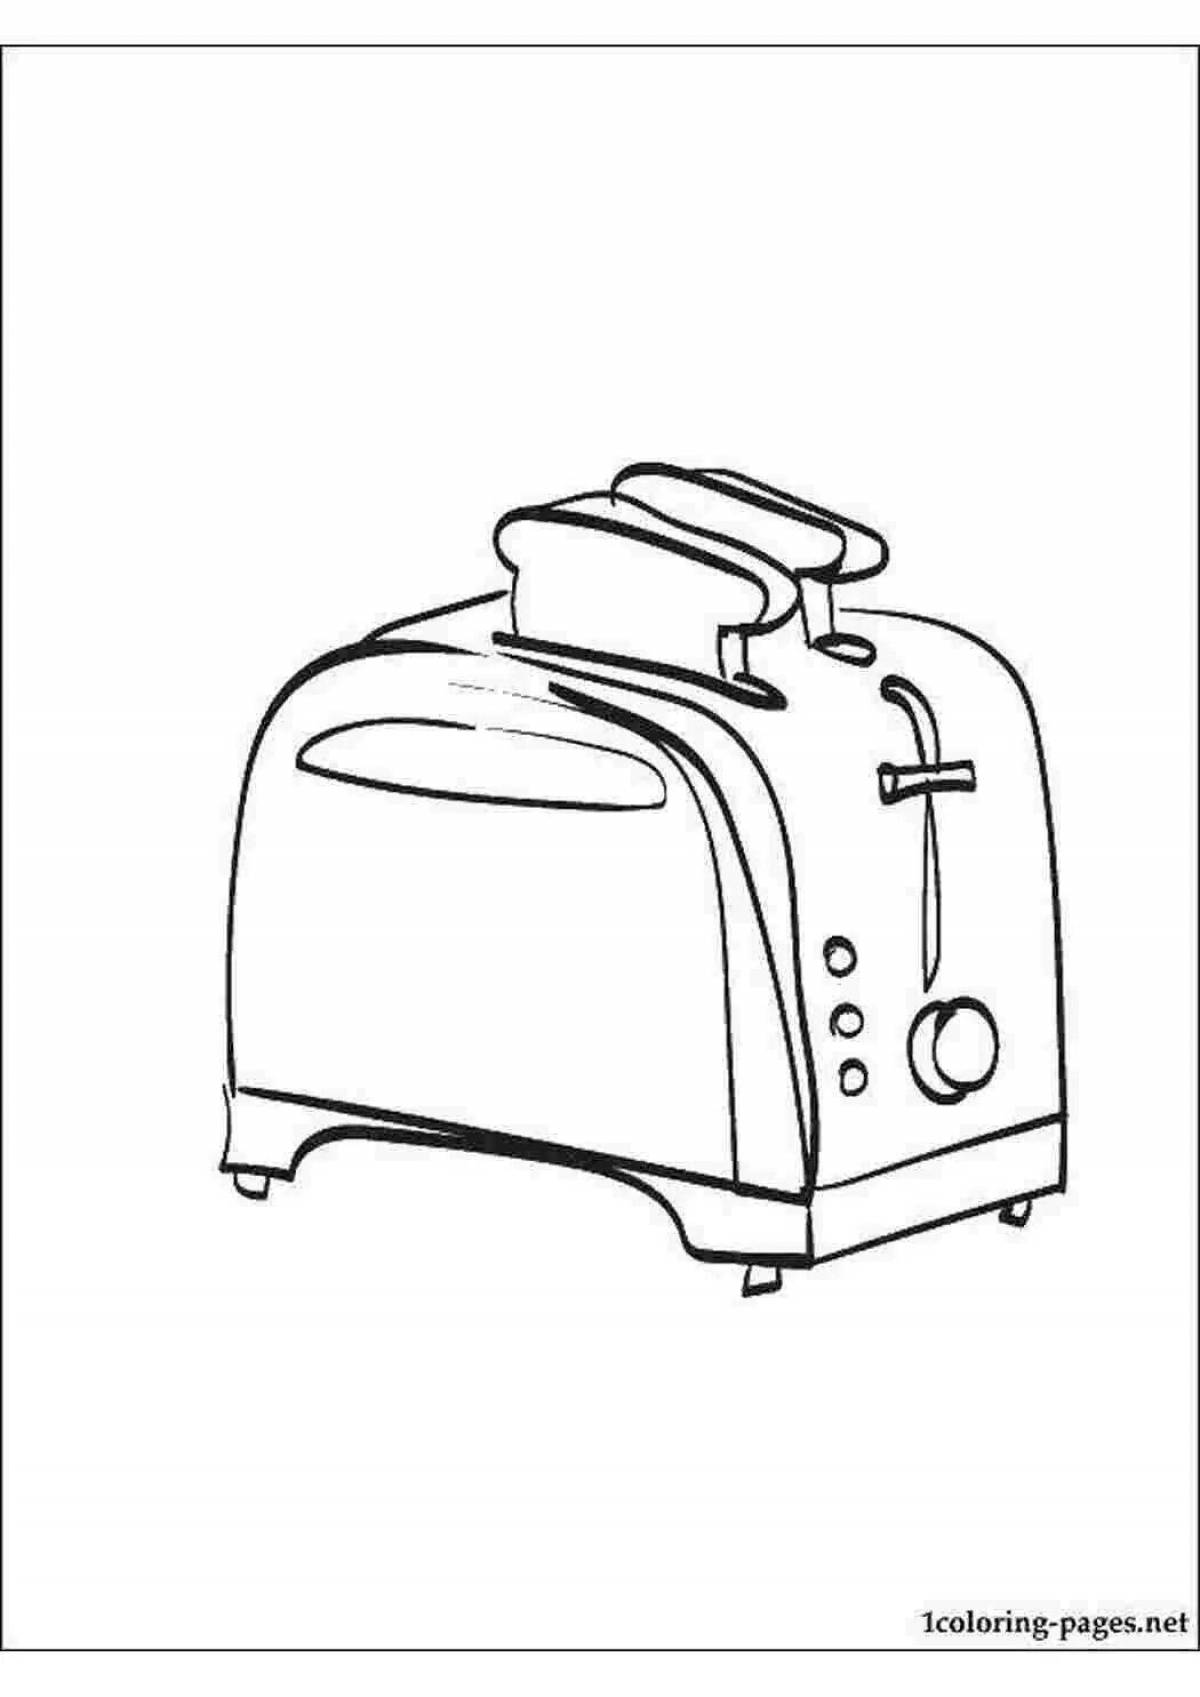 Fun toaster coloring page